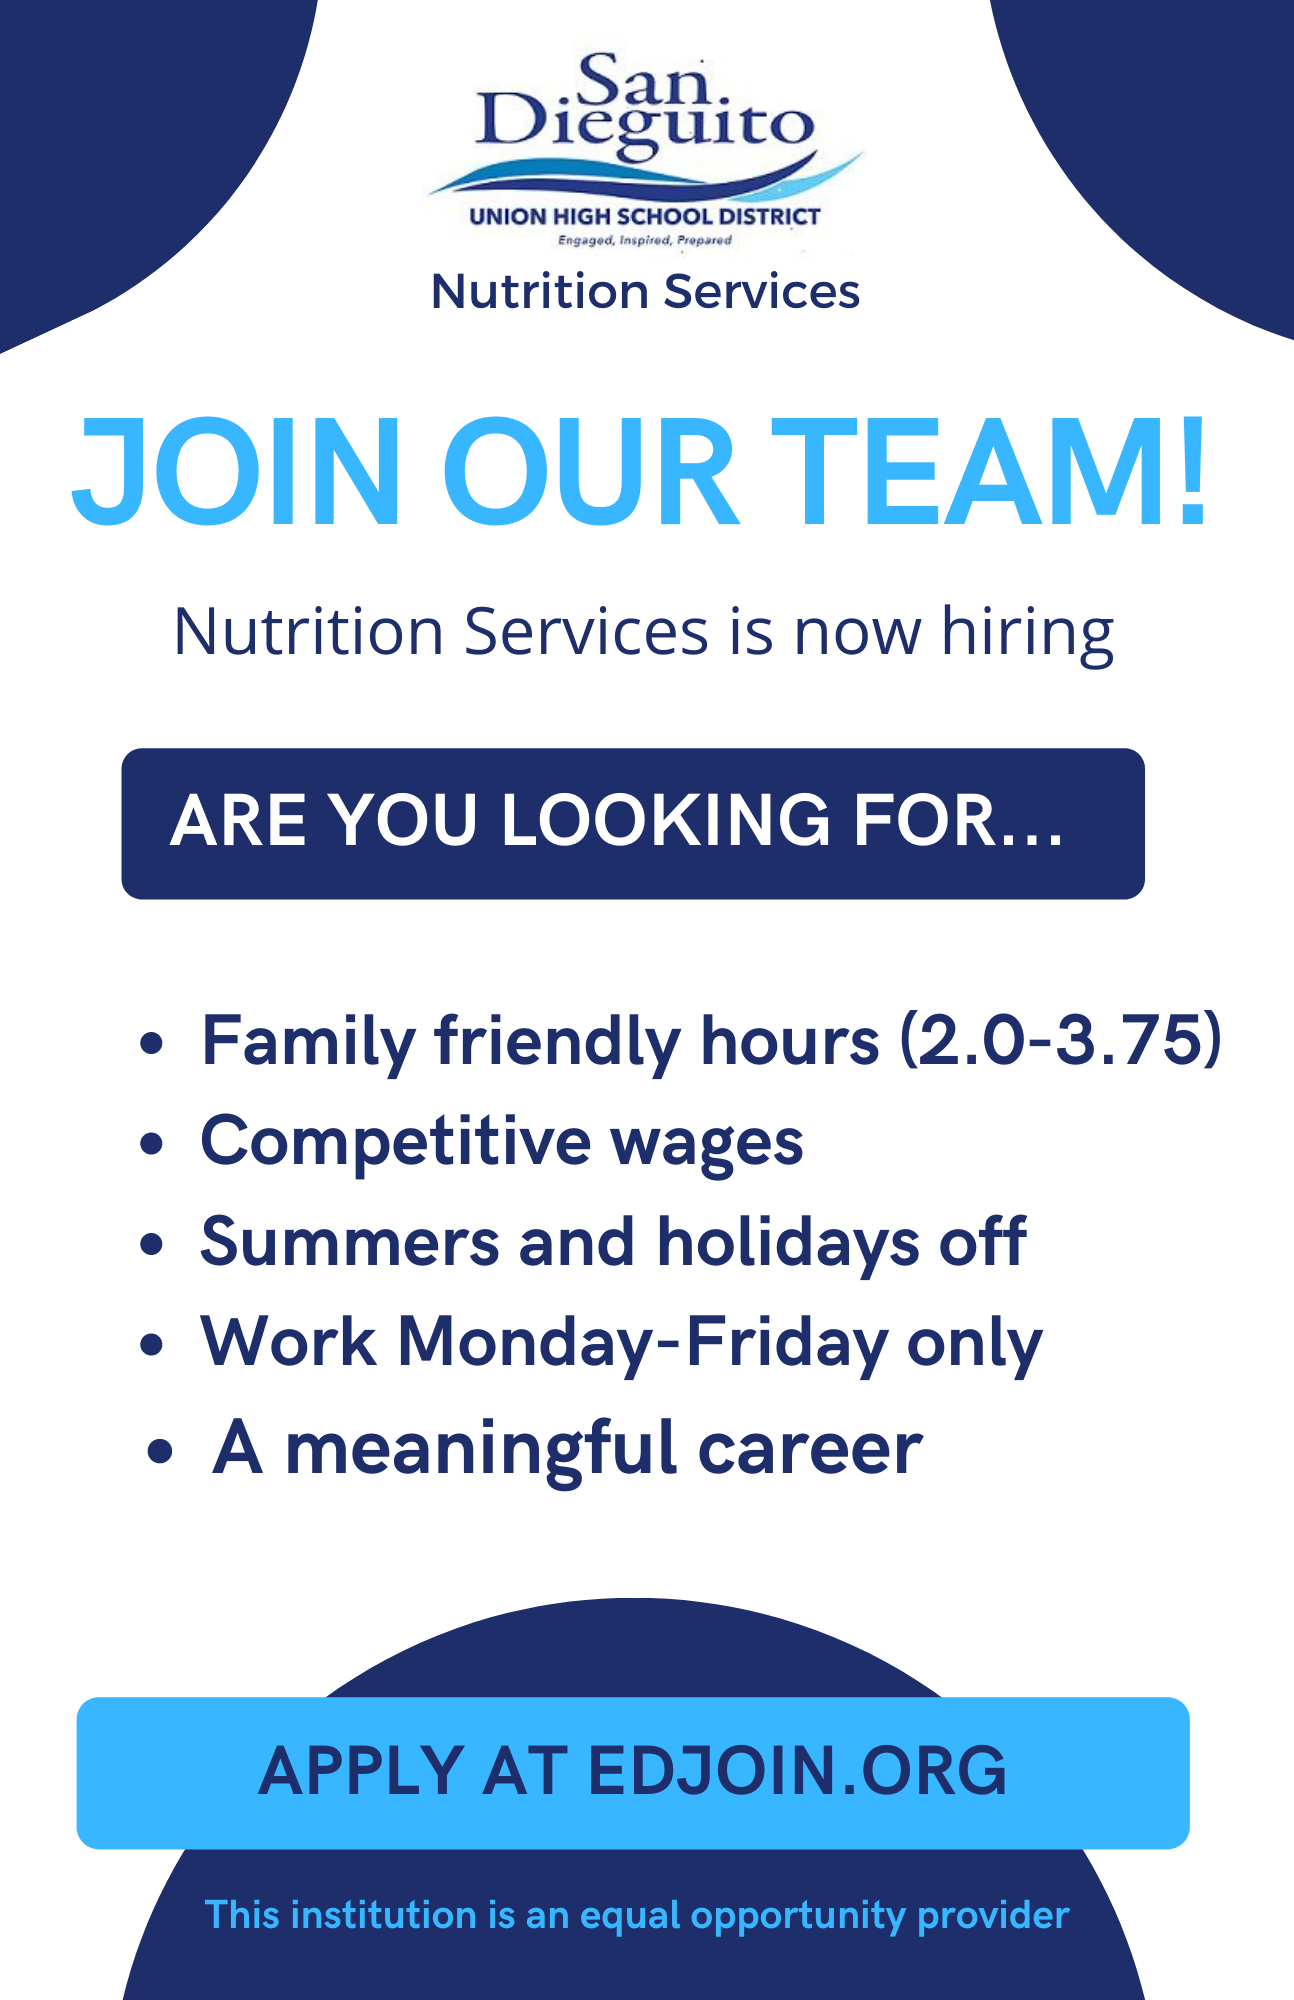 NS SDUHSD JOIN OUR TEAM!.png